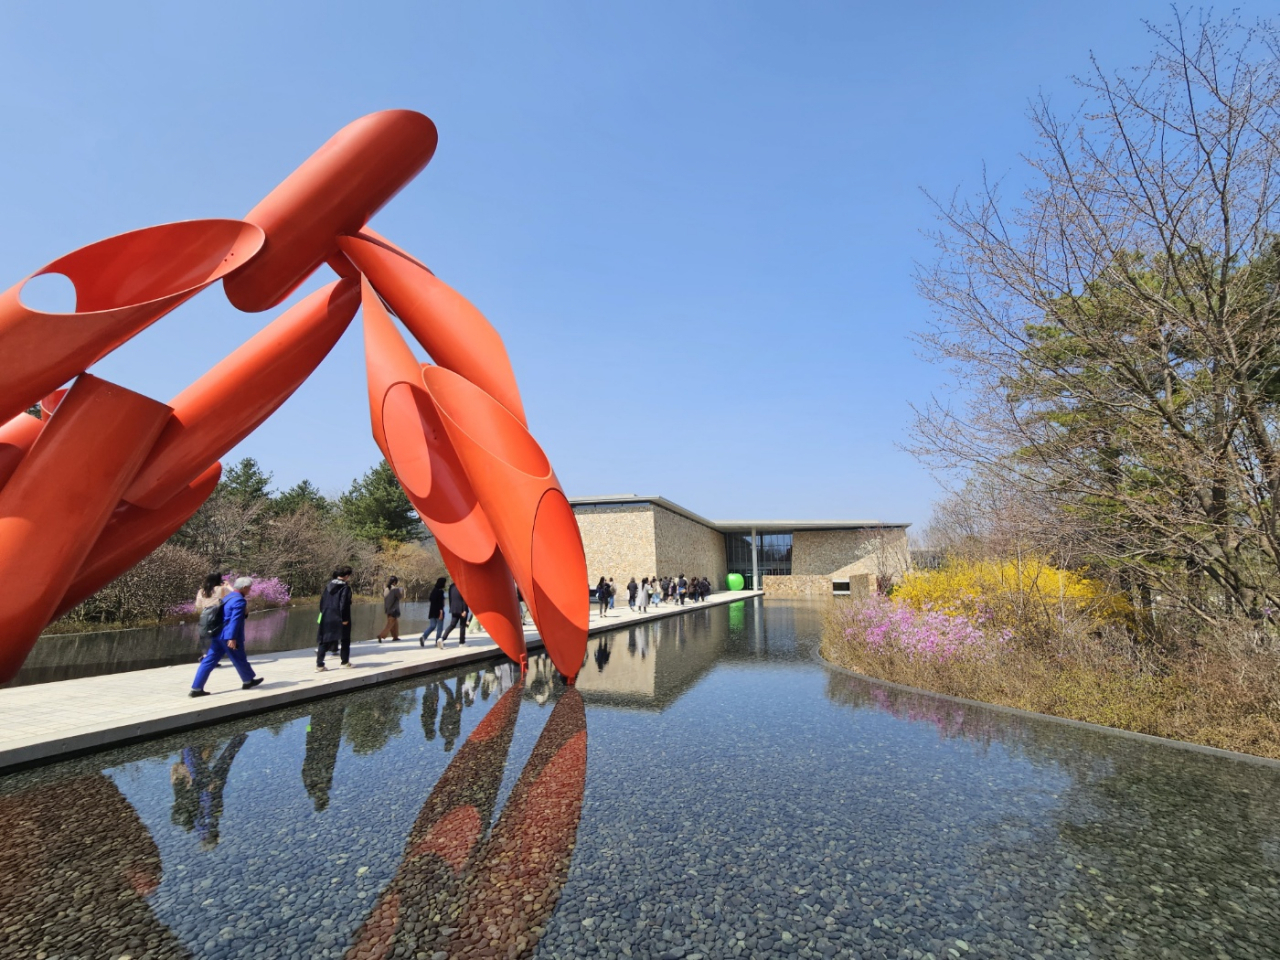 Museum SAN in Wonju, Gangwon Province welcomes spring, visitors on March 31. (Park Yuna/The Korea Herald)